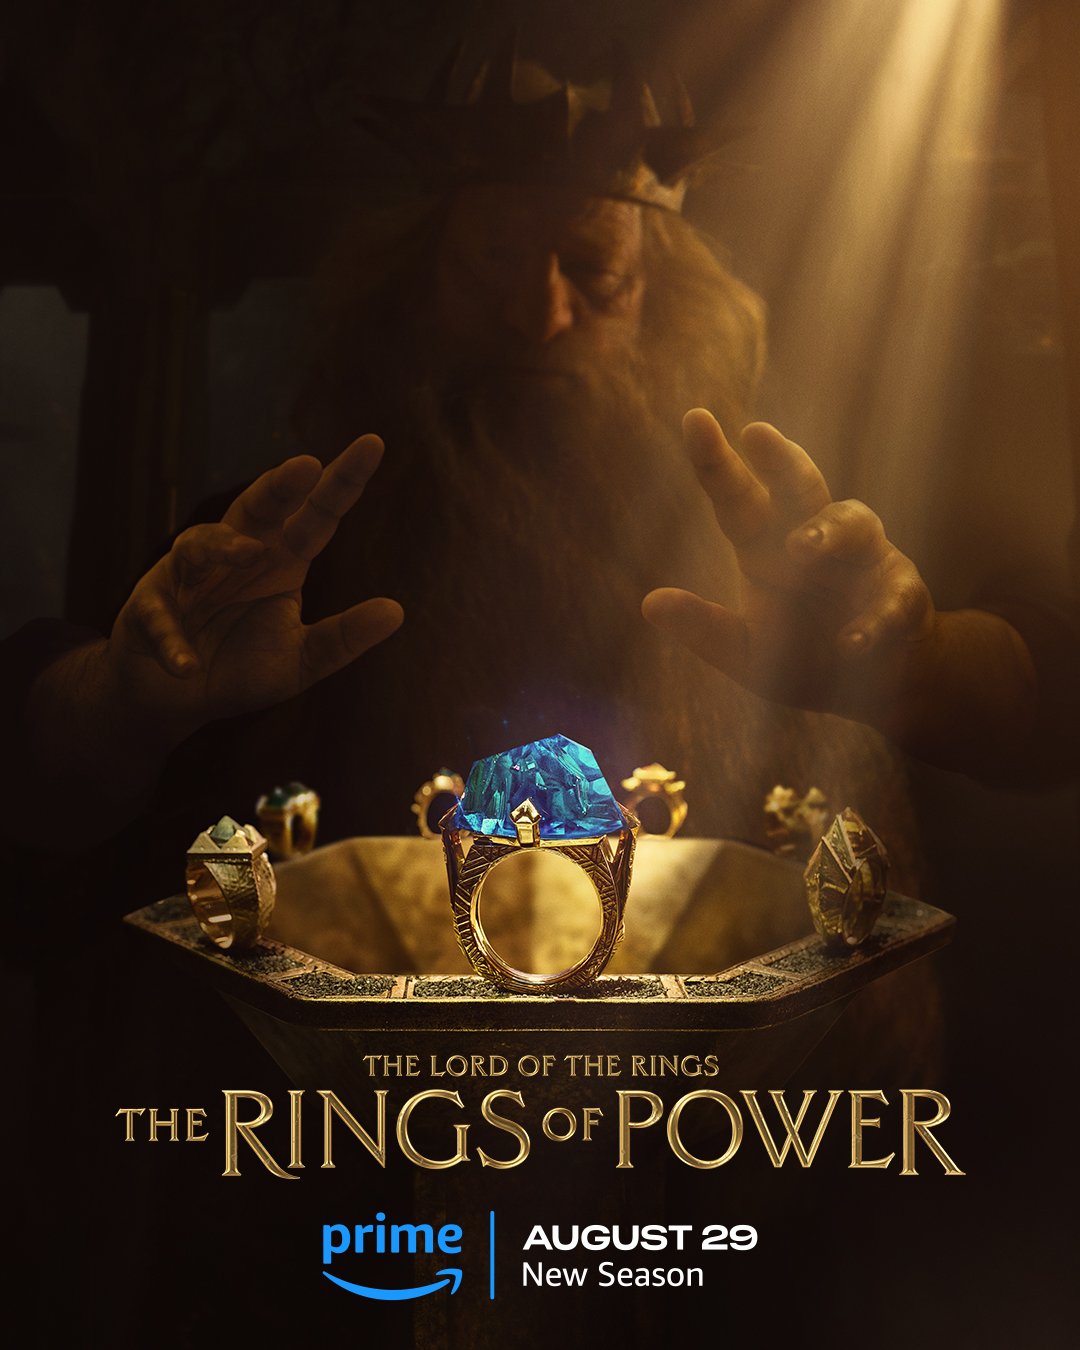 dwarven rings the lord of the rings the rings of power king durin